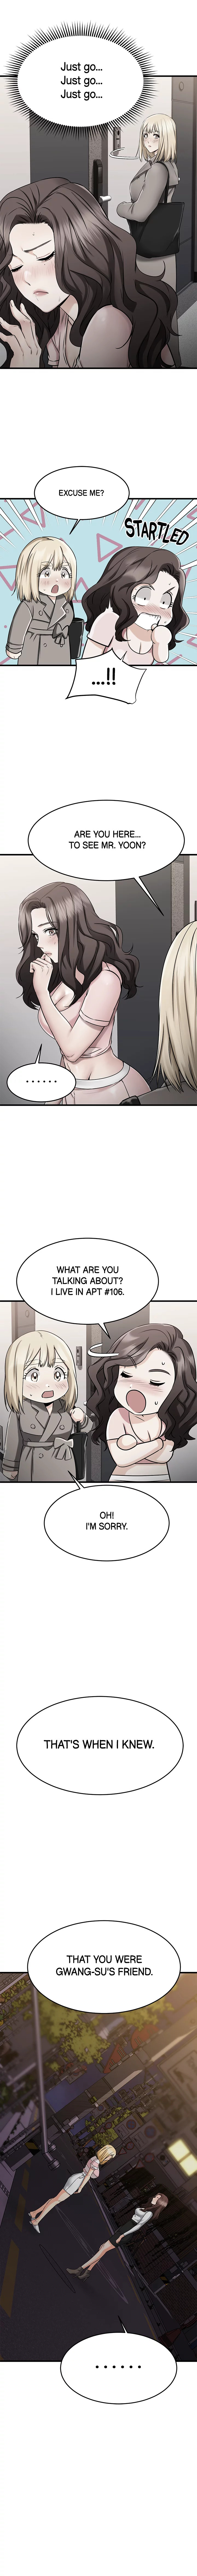 My Female Friend Who Crossed The Line - Chapter 46 Page 3